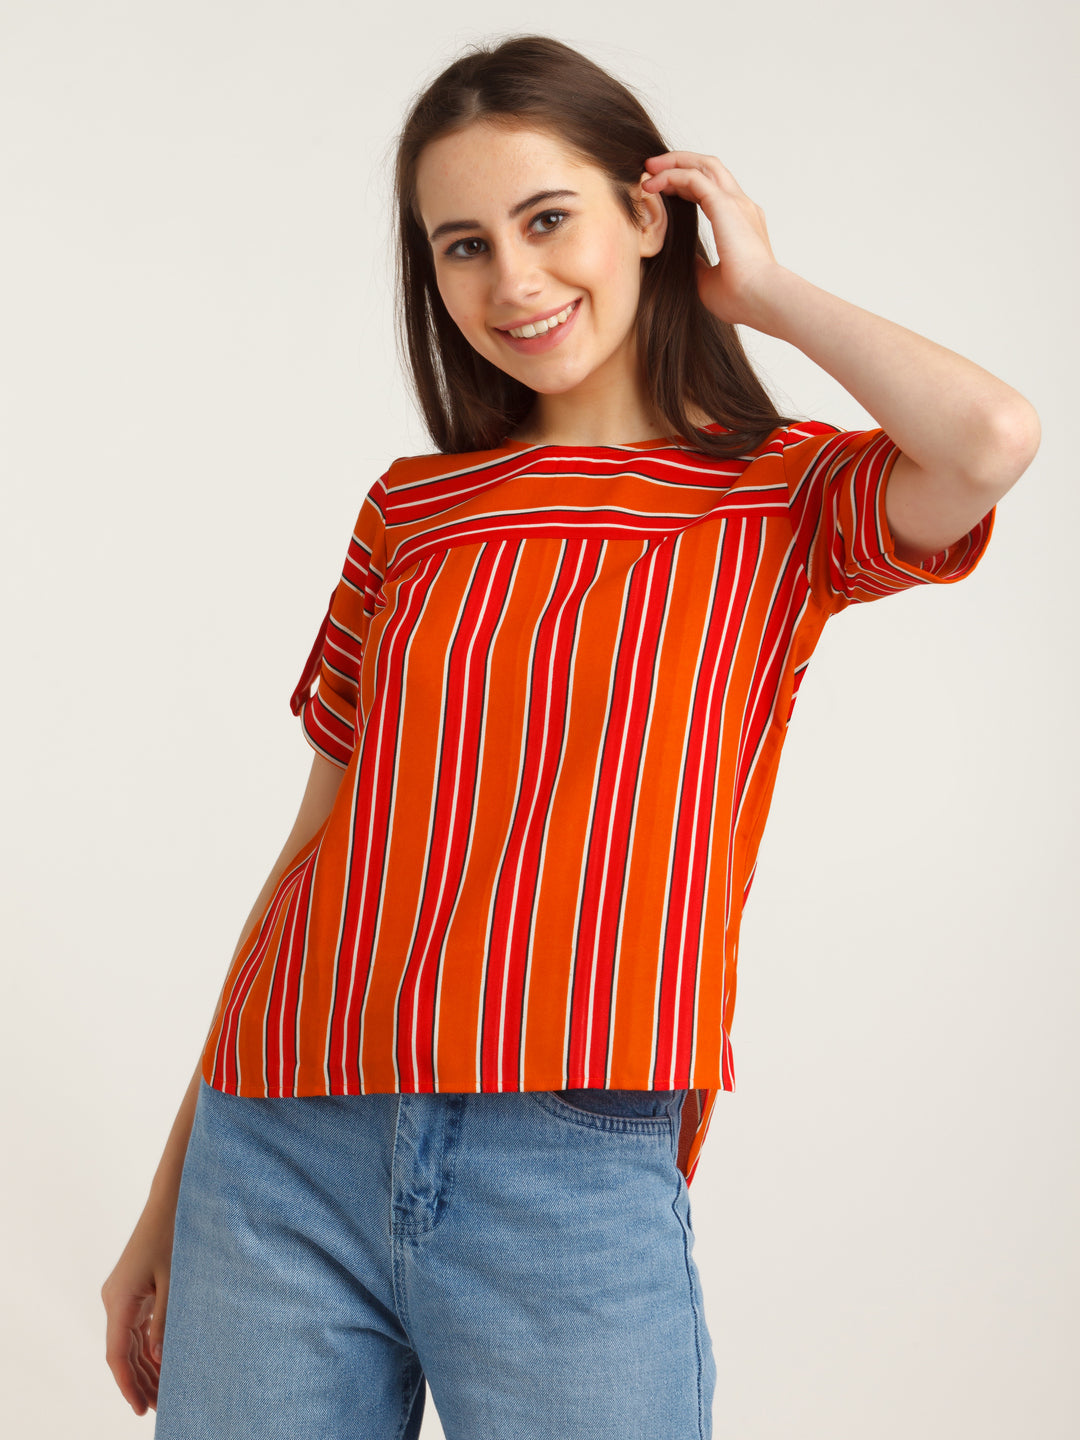 Multicolored Printed Straight Top For Women